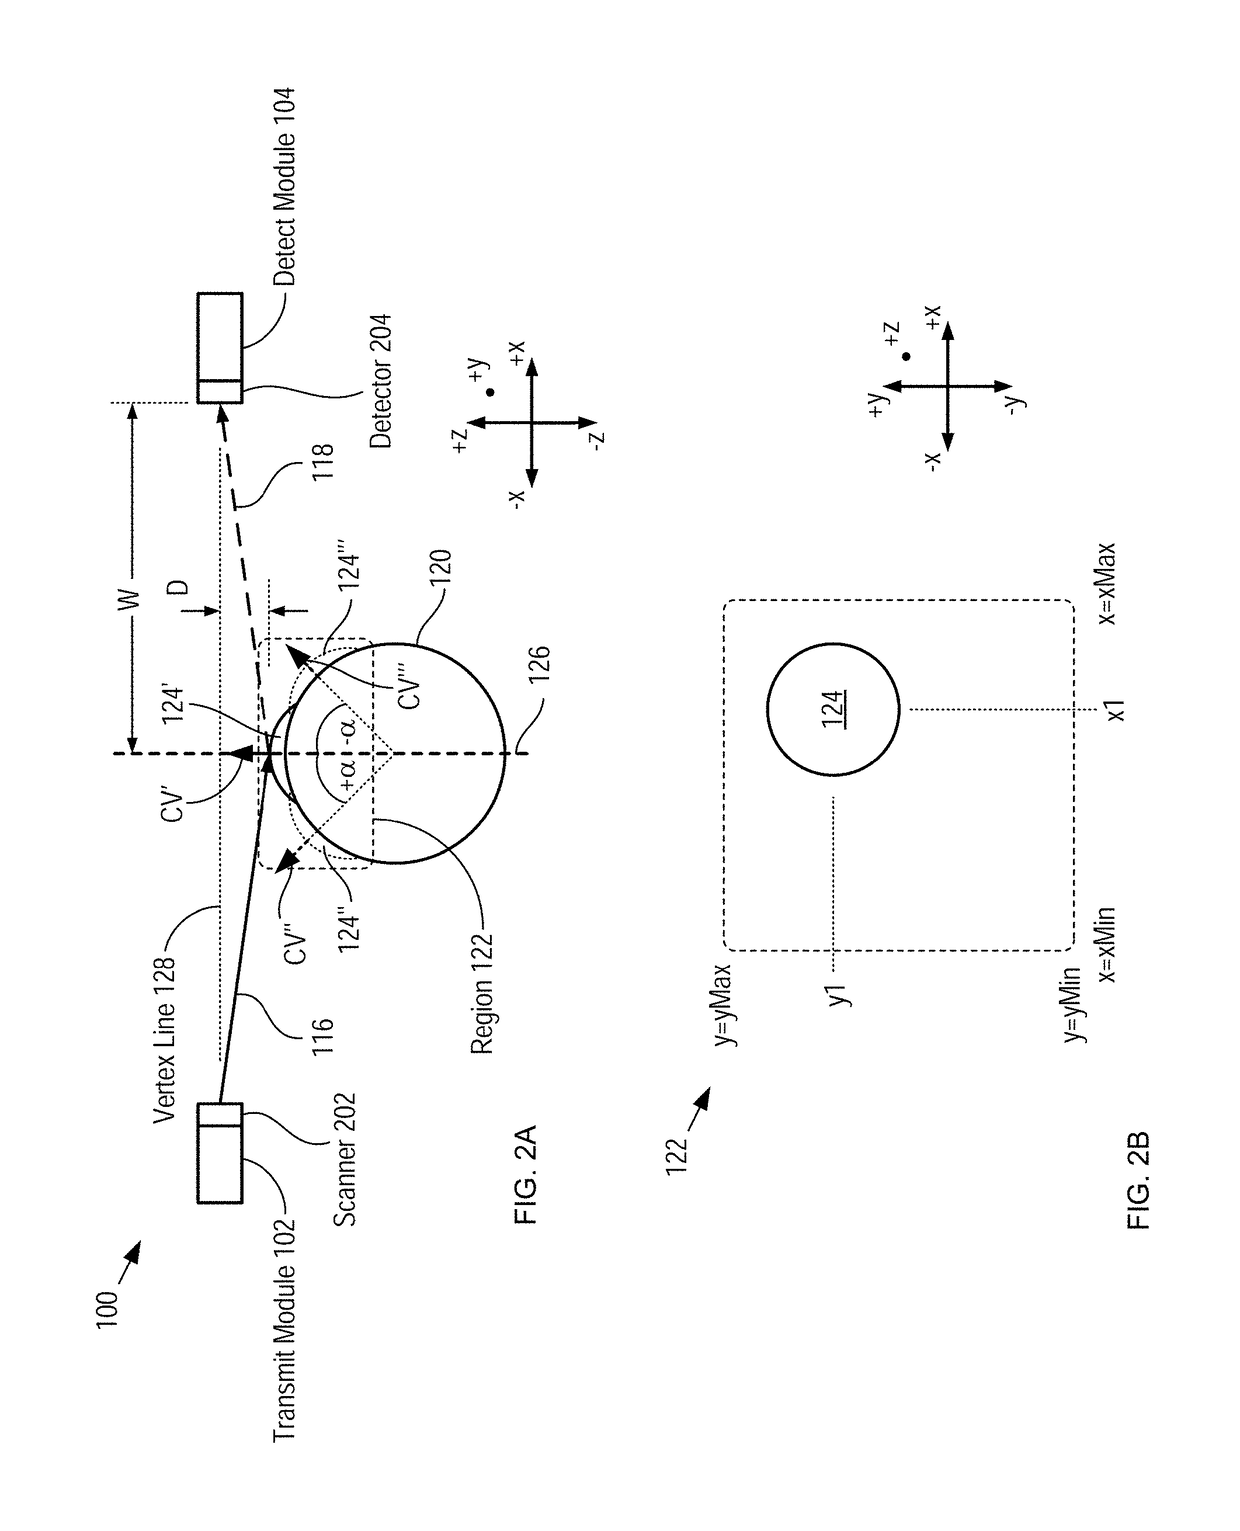 Eye-tracking system and method therefor